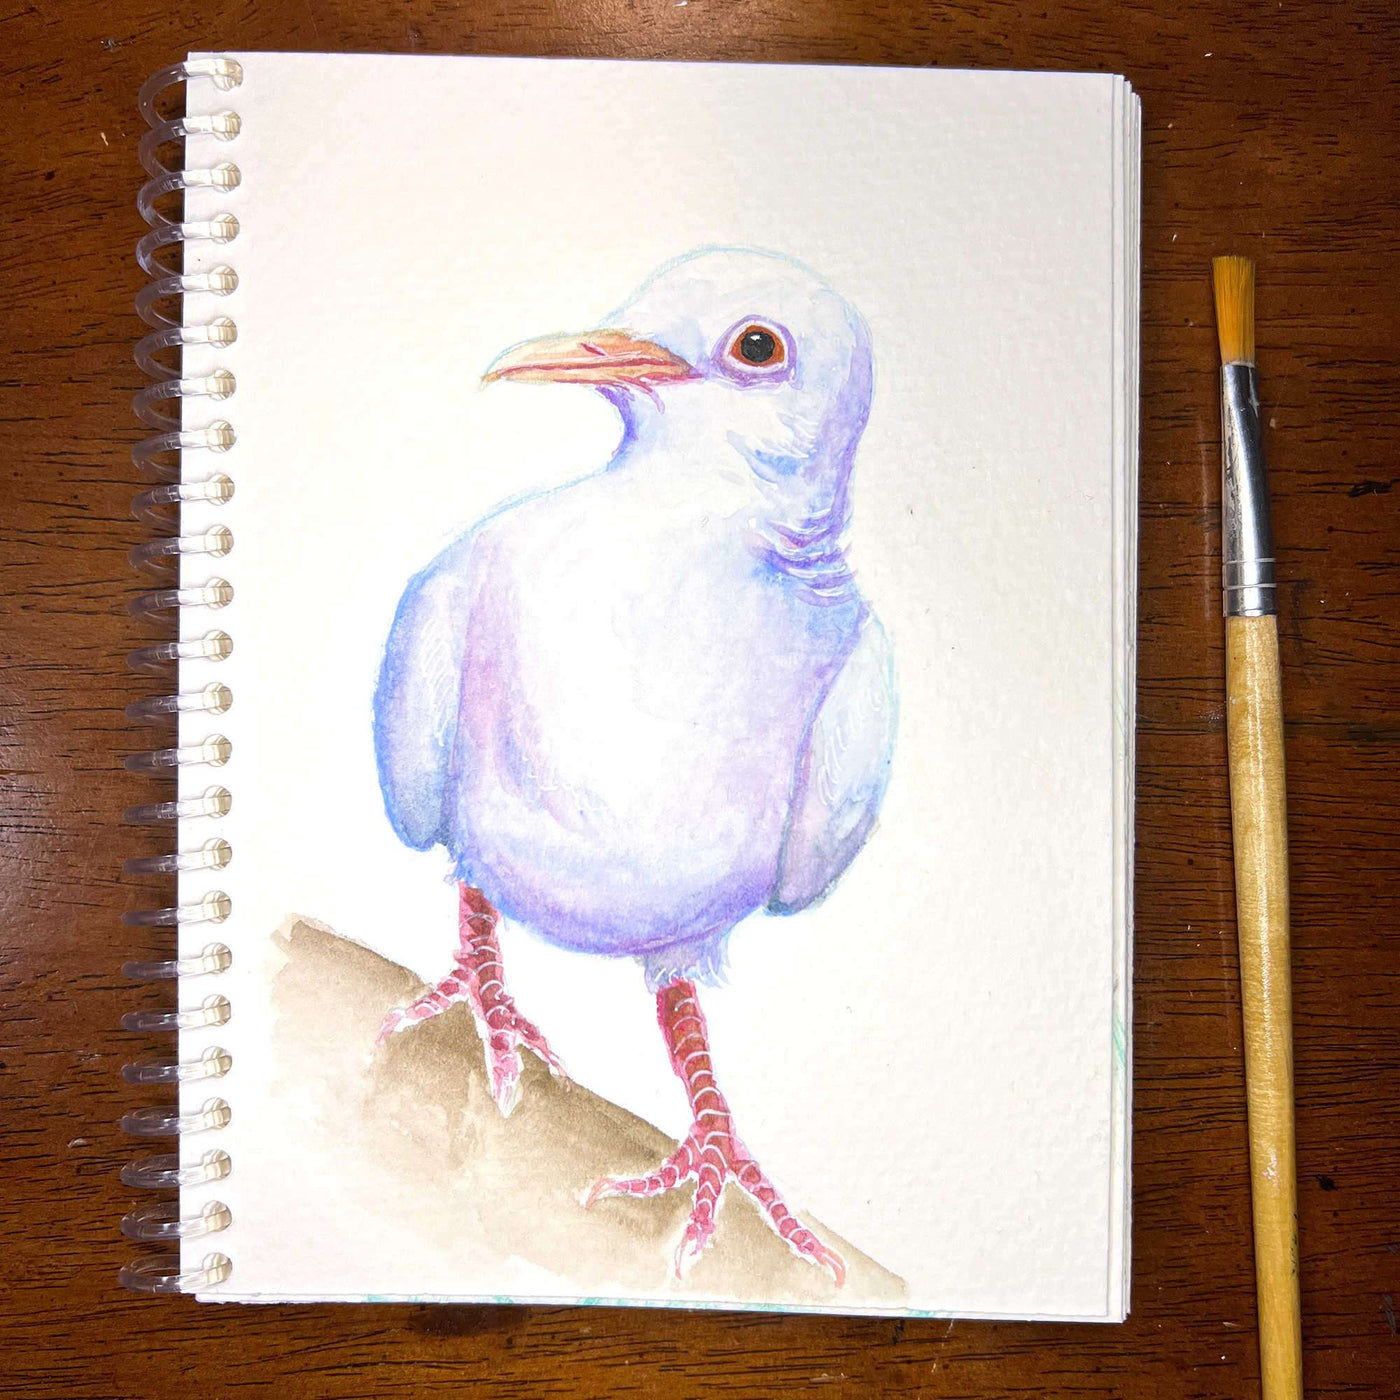 Watercolor painting sketch of a dove in blue tones with red feet, alongside a paintbrush.